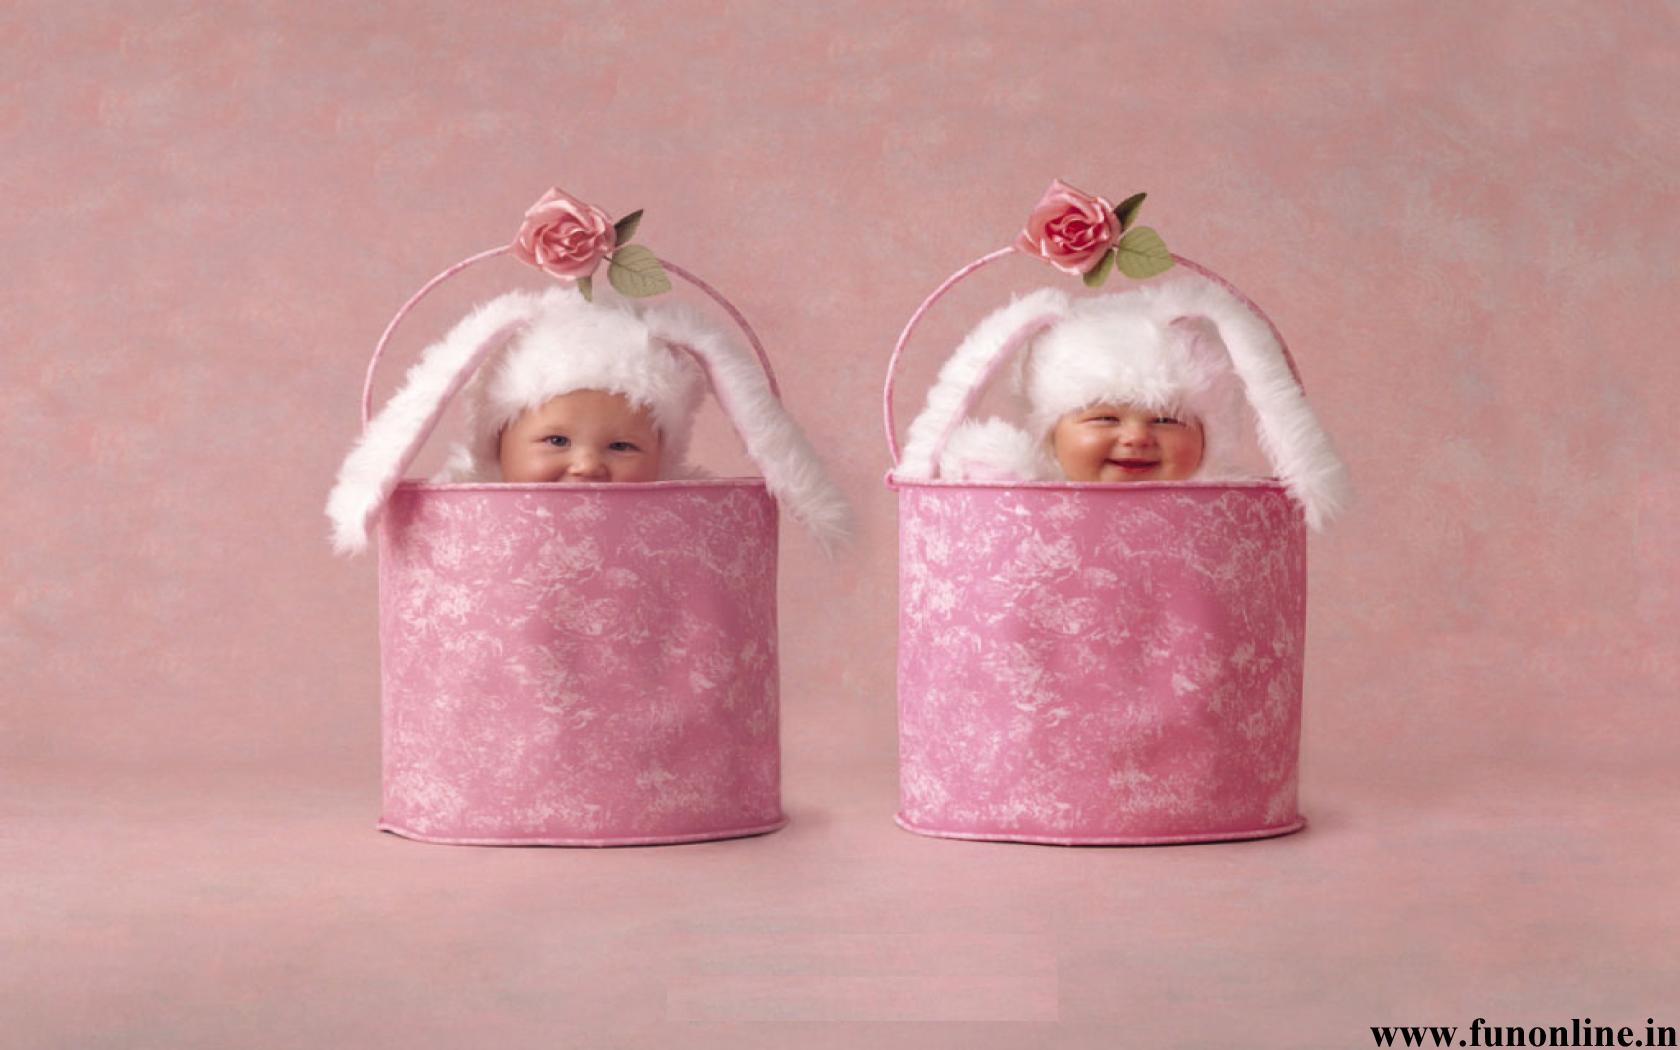 Cute Twin Babies In Bunny Costume Sitting In Basket - Anne Geddes Due , HD Wallpaper & Backgrounds